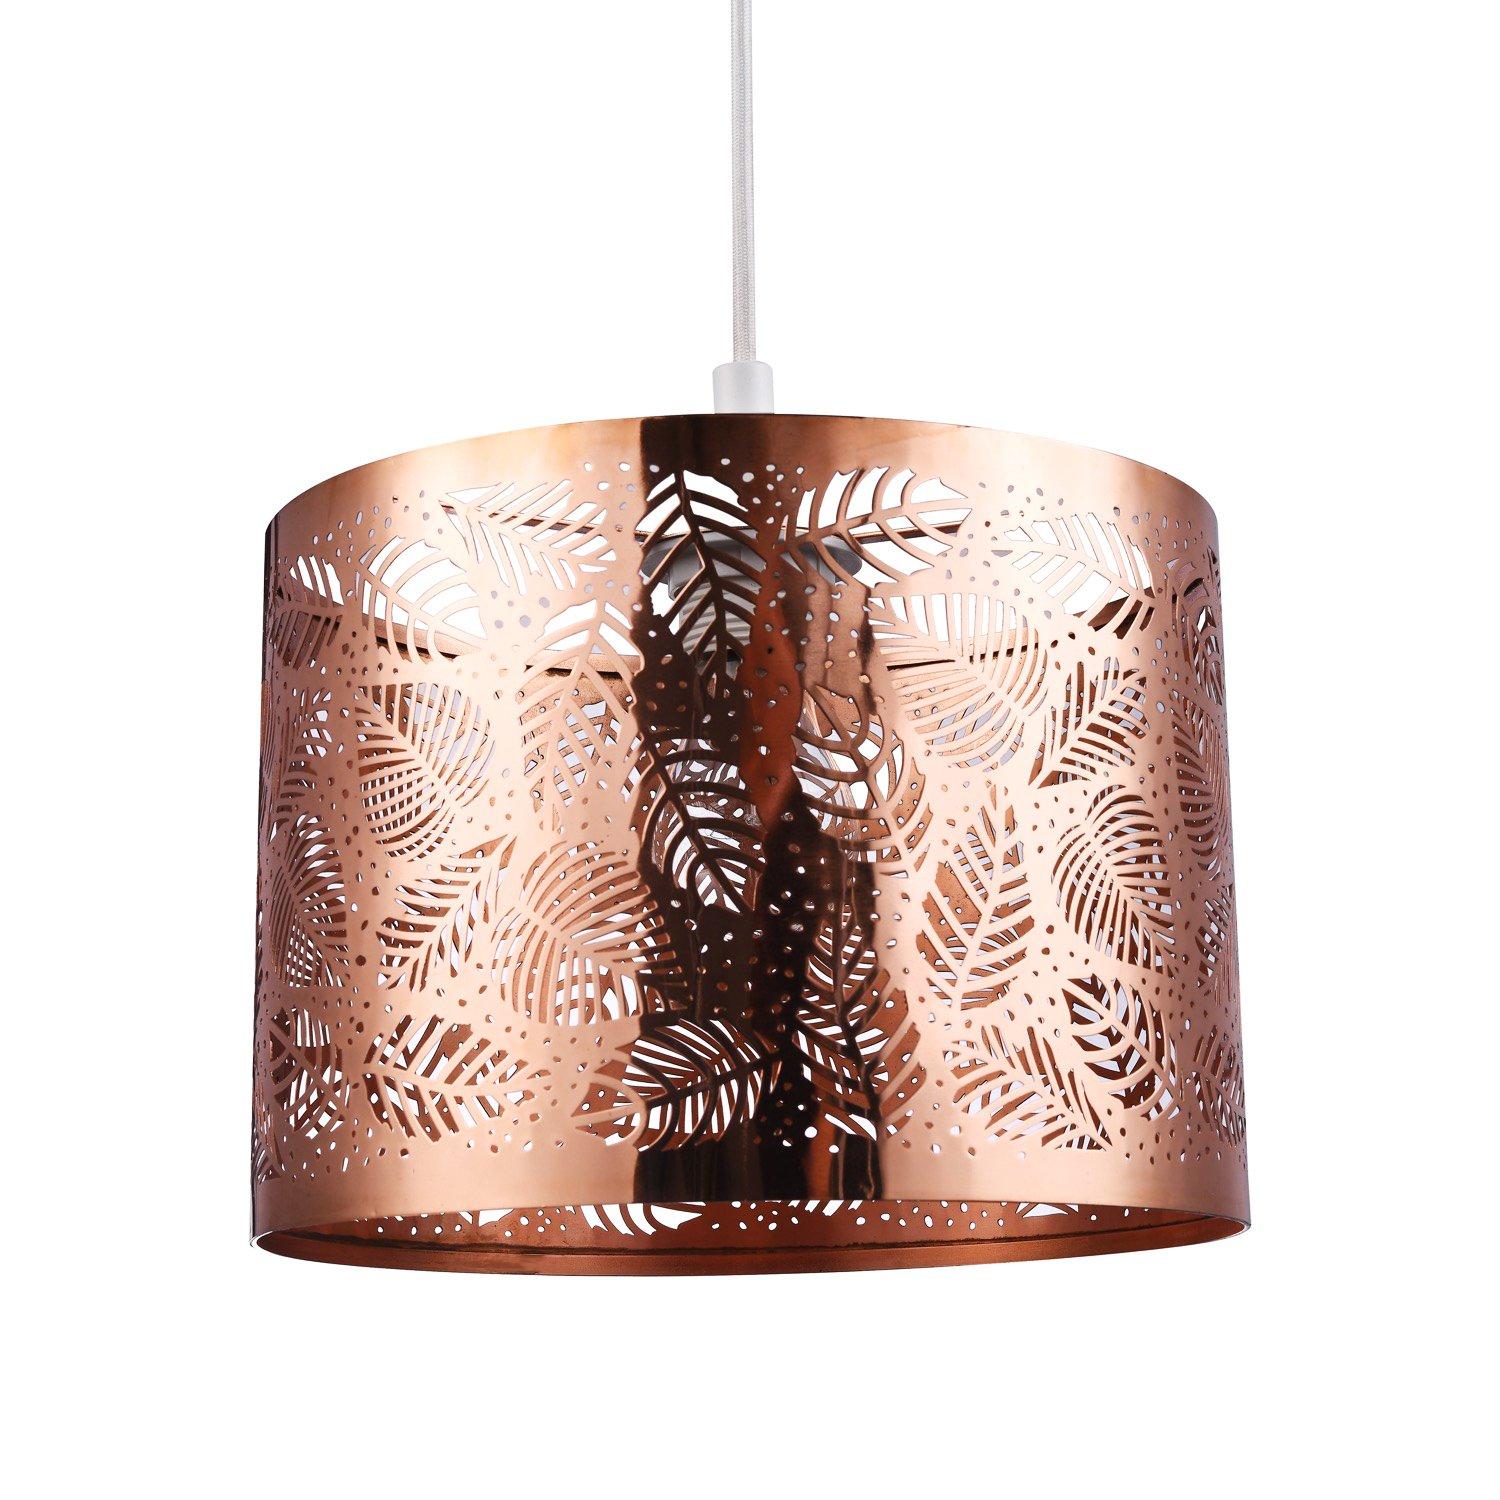 Contemporary Metal Pendant Light Shade with Fern Leaf Decoration